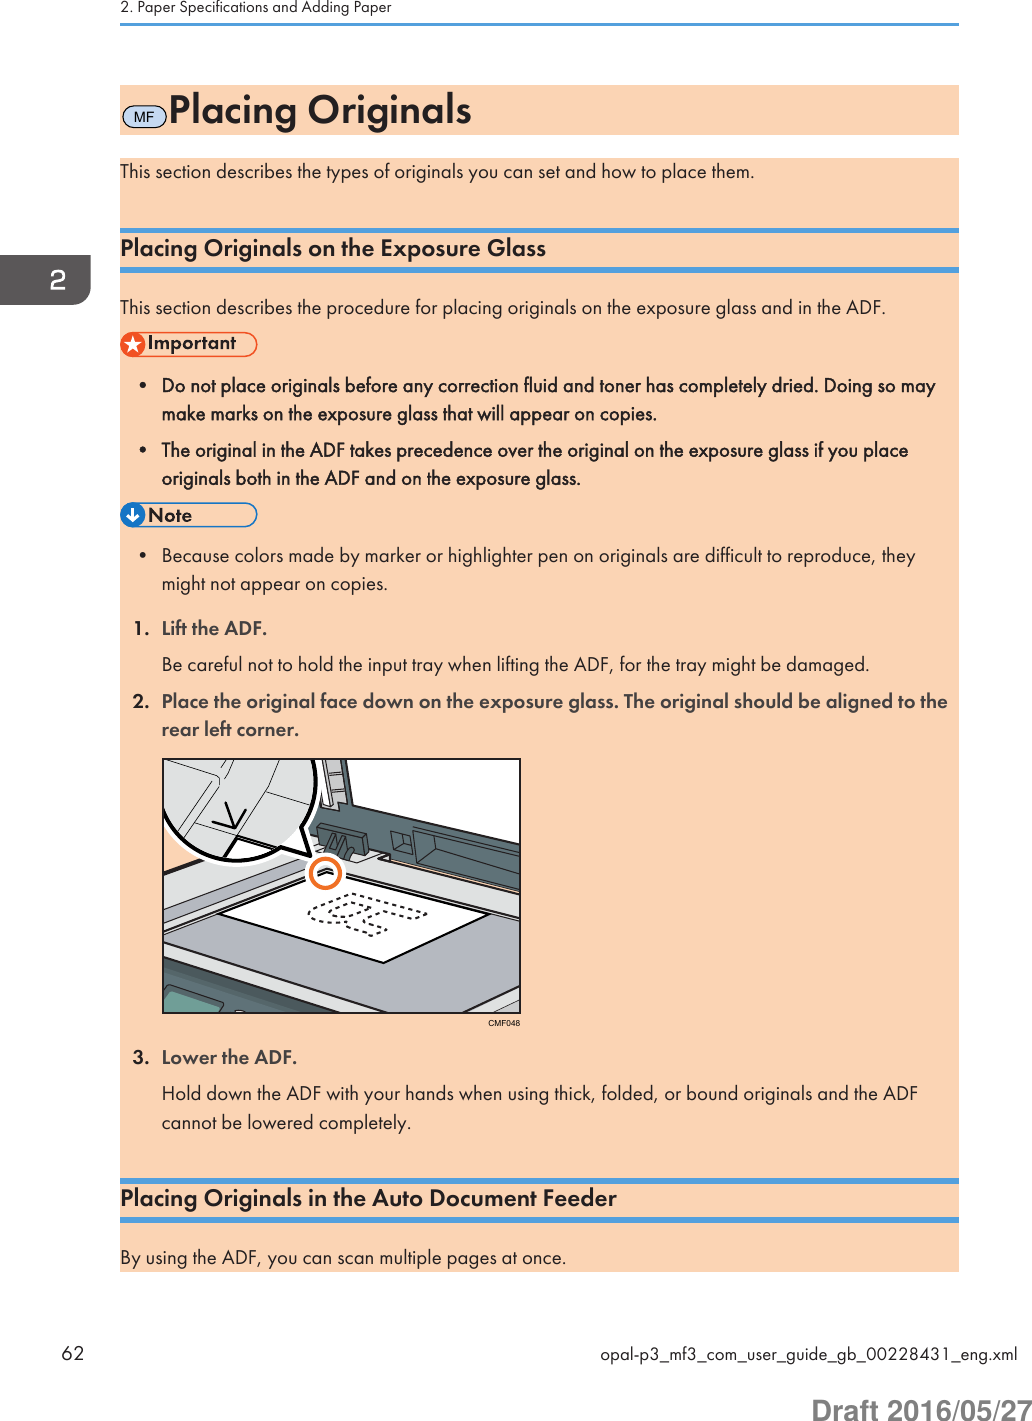 MFPlacing OriginalsThis section describes the types of originals you can set and how to place them.Placing Originals on the Exposure GlassThis section describes the procedure for placing originals on the exposure glass and in the ADF.• Do not place originals before any correction fluid and toner has completely dried. Doing so maymake marks on the exposure glass that will appear on copies.• The original in the ADF takes precedence over the original on the exposure glass if you placeoriginals both in the ADF and on the exposure glass.• Because colors made by marker or highlighter pen on originals are difficult to reproduce, theymight not appear on copies.1. Lift the ADF.Be careful not to hold the input tray when lifting the ADF, for the tray might be damaged.2. Place the original face down on the exposure glass. The original should be aligned to therear left corner.CMF0483. Lower the ADF.Hold down the ADF with your hands when using thick, folded, or bound originals and the ADFcannot be lowered completely.Placing Originals in the Auto Document FeederBy using the ADF, you can scan multiple pages at once.2. Paper Specifications and Adding Paper62 opal-p3_mf3_com_user_guide_gb_00228431_eng.xmlDraft 2016/05/27